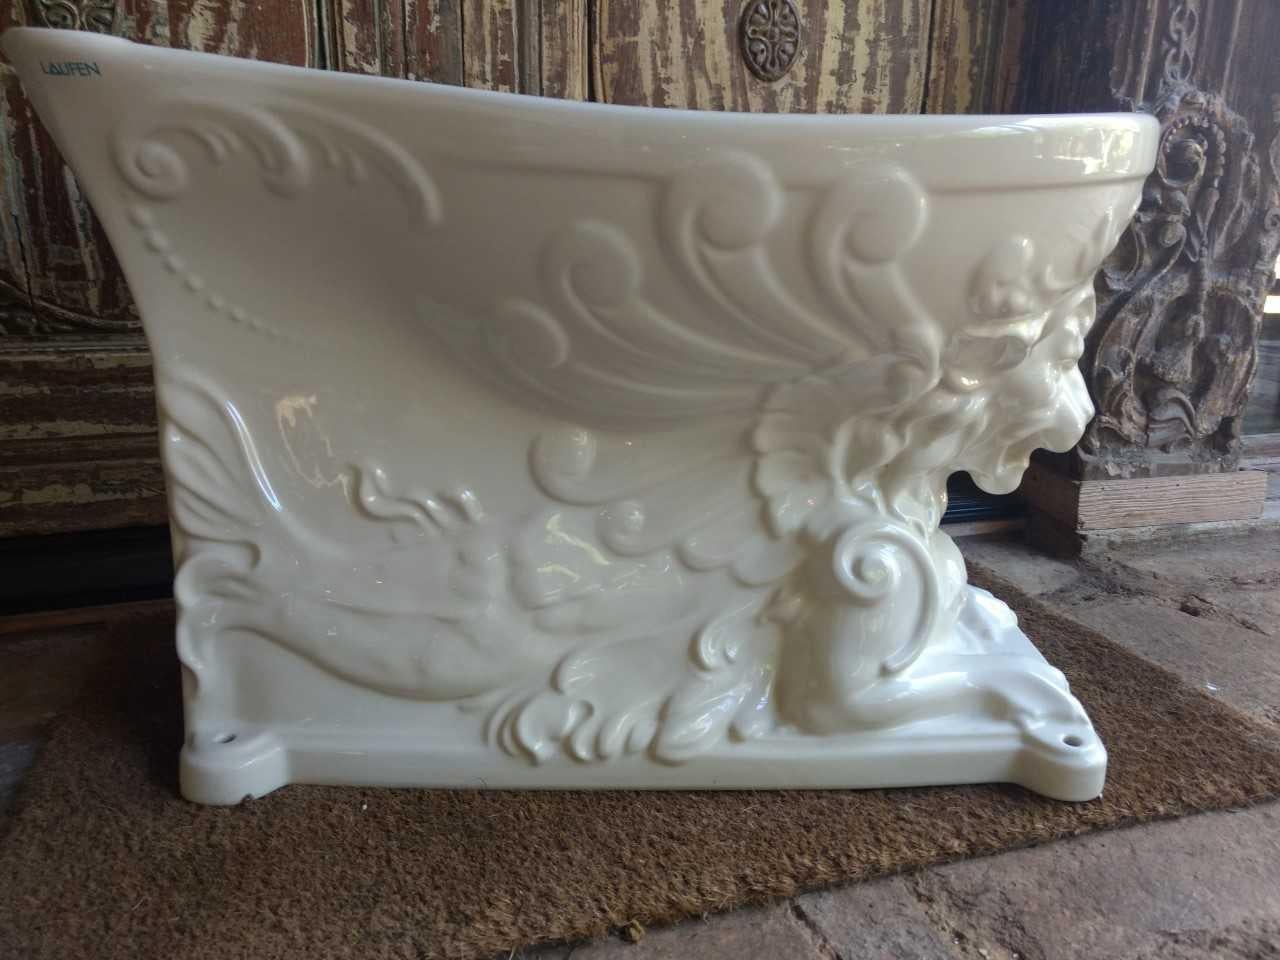 A rare and beautifully sculptured lion form Laufen Porcelain Bidet. Found still in its original packaging and box, immaculate condition.
Uses, planter, fountain, bidet or center piece.
We believe this to be a custom order as we have researched and